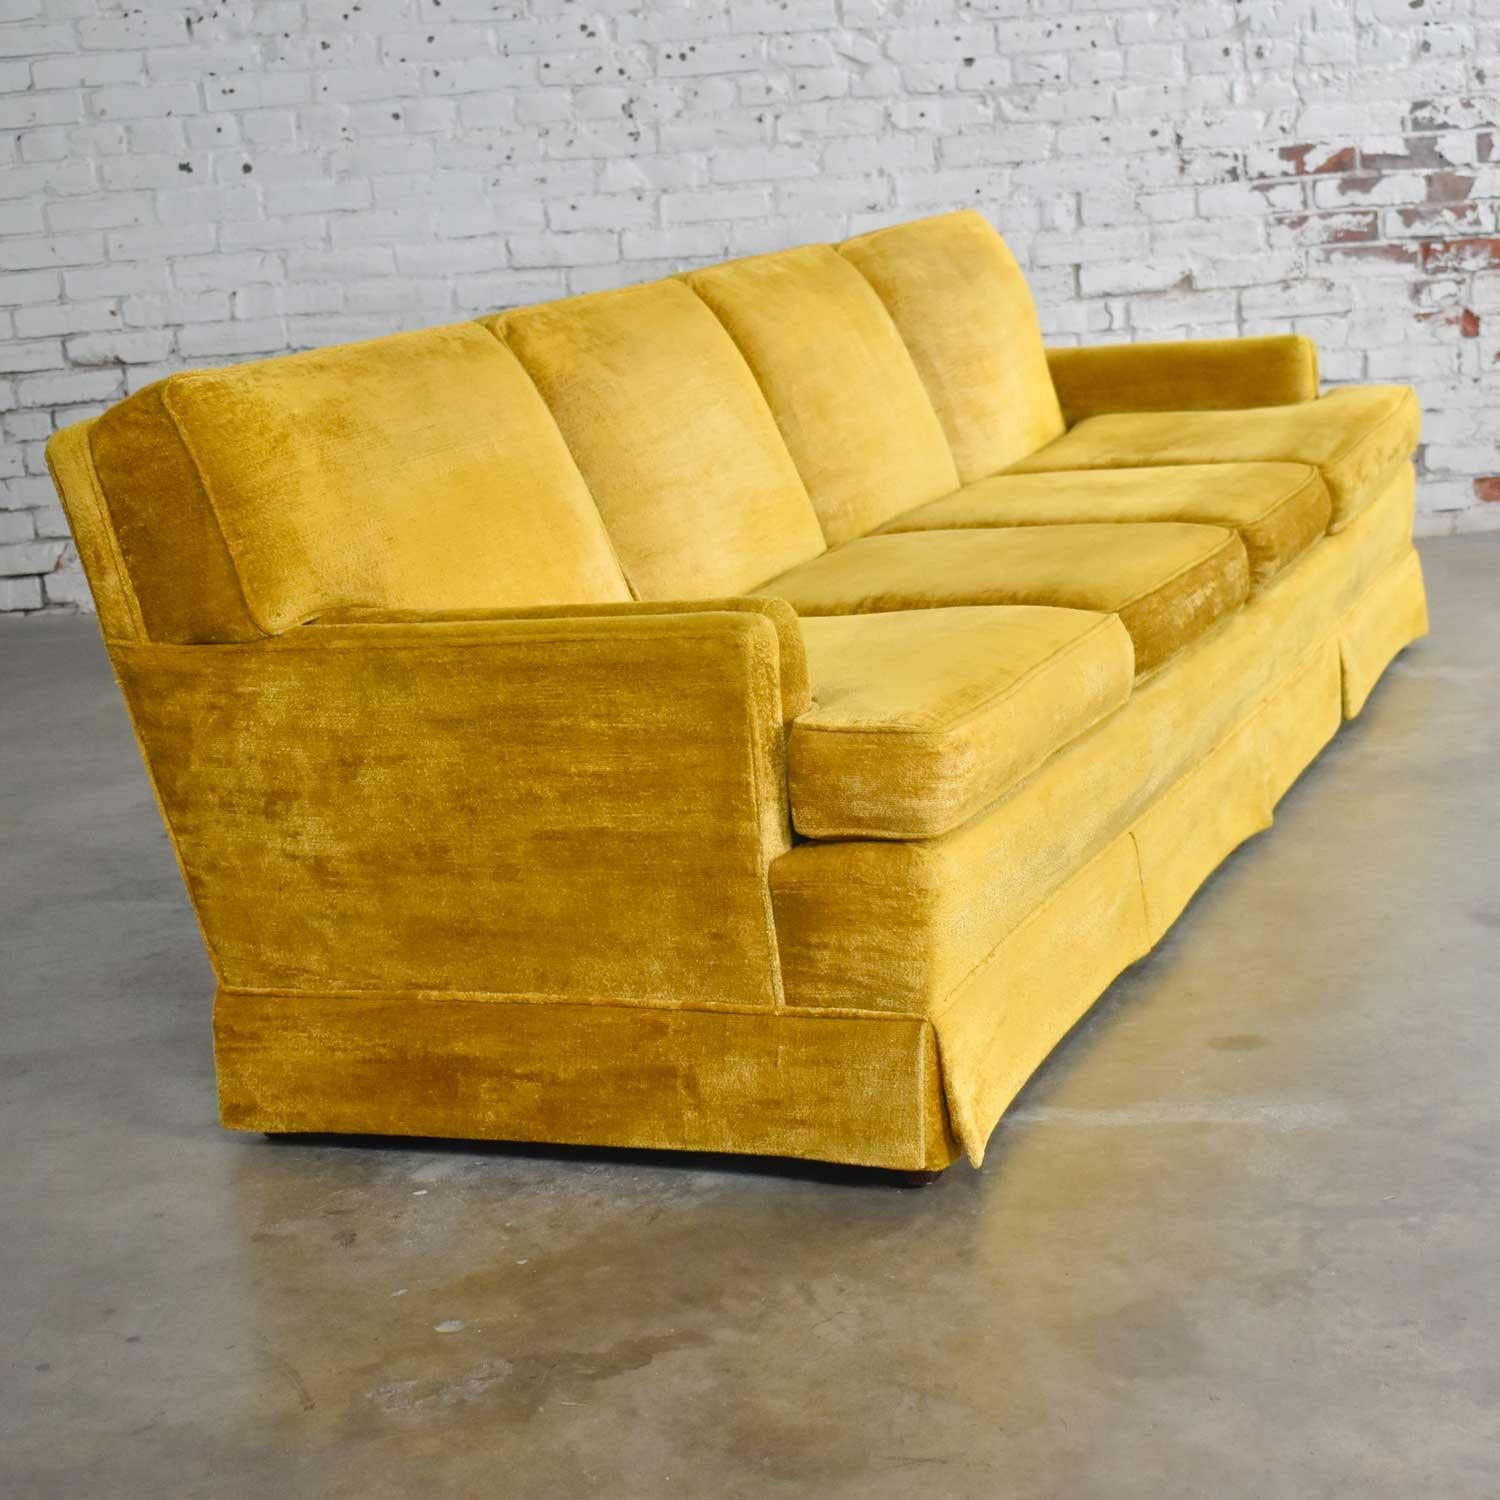 Beautiful MCM Mid-Century Modern Lawson style four cushion gold velvet sofa Park Slope Collection by Philadelphia Chair Company for Abraham & Straus. Wonderful vintage condition with wear as you would expect with vintage pieces. There is one spot on